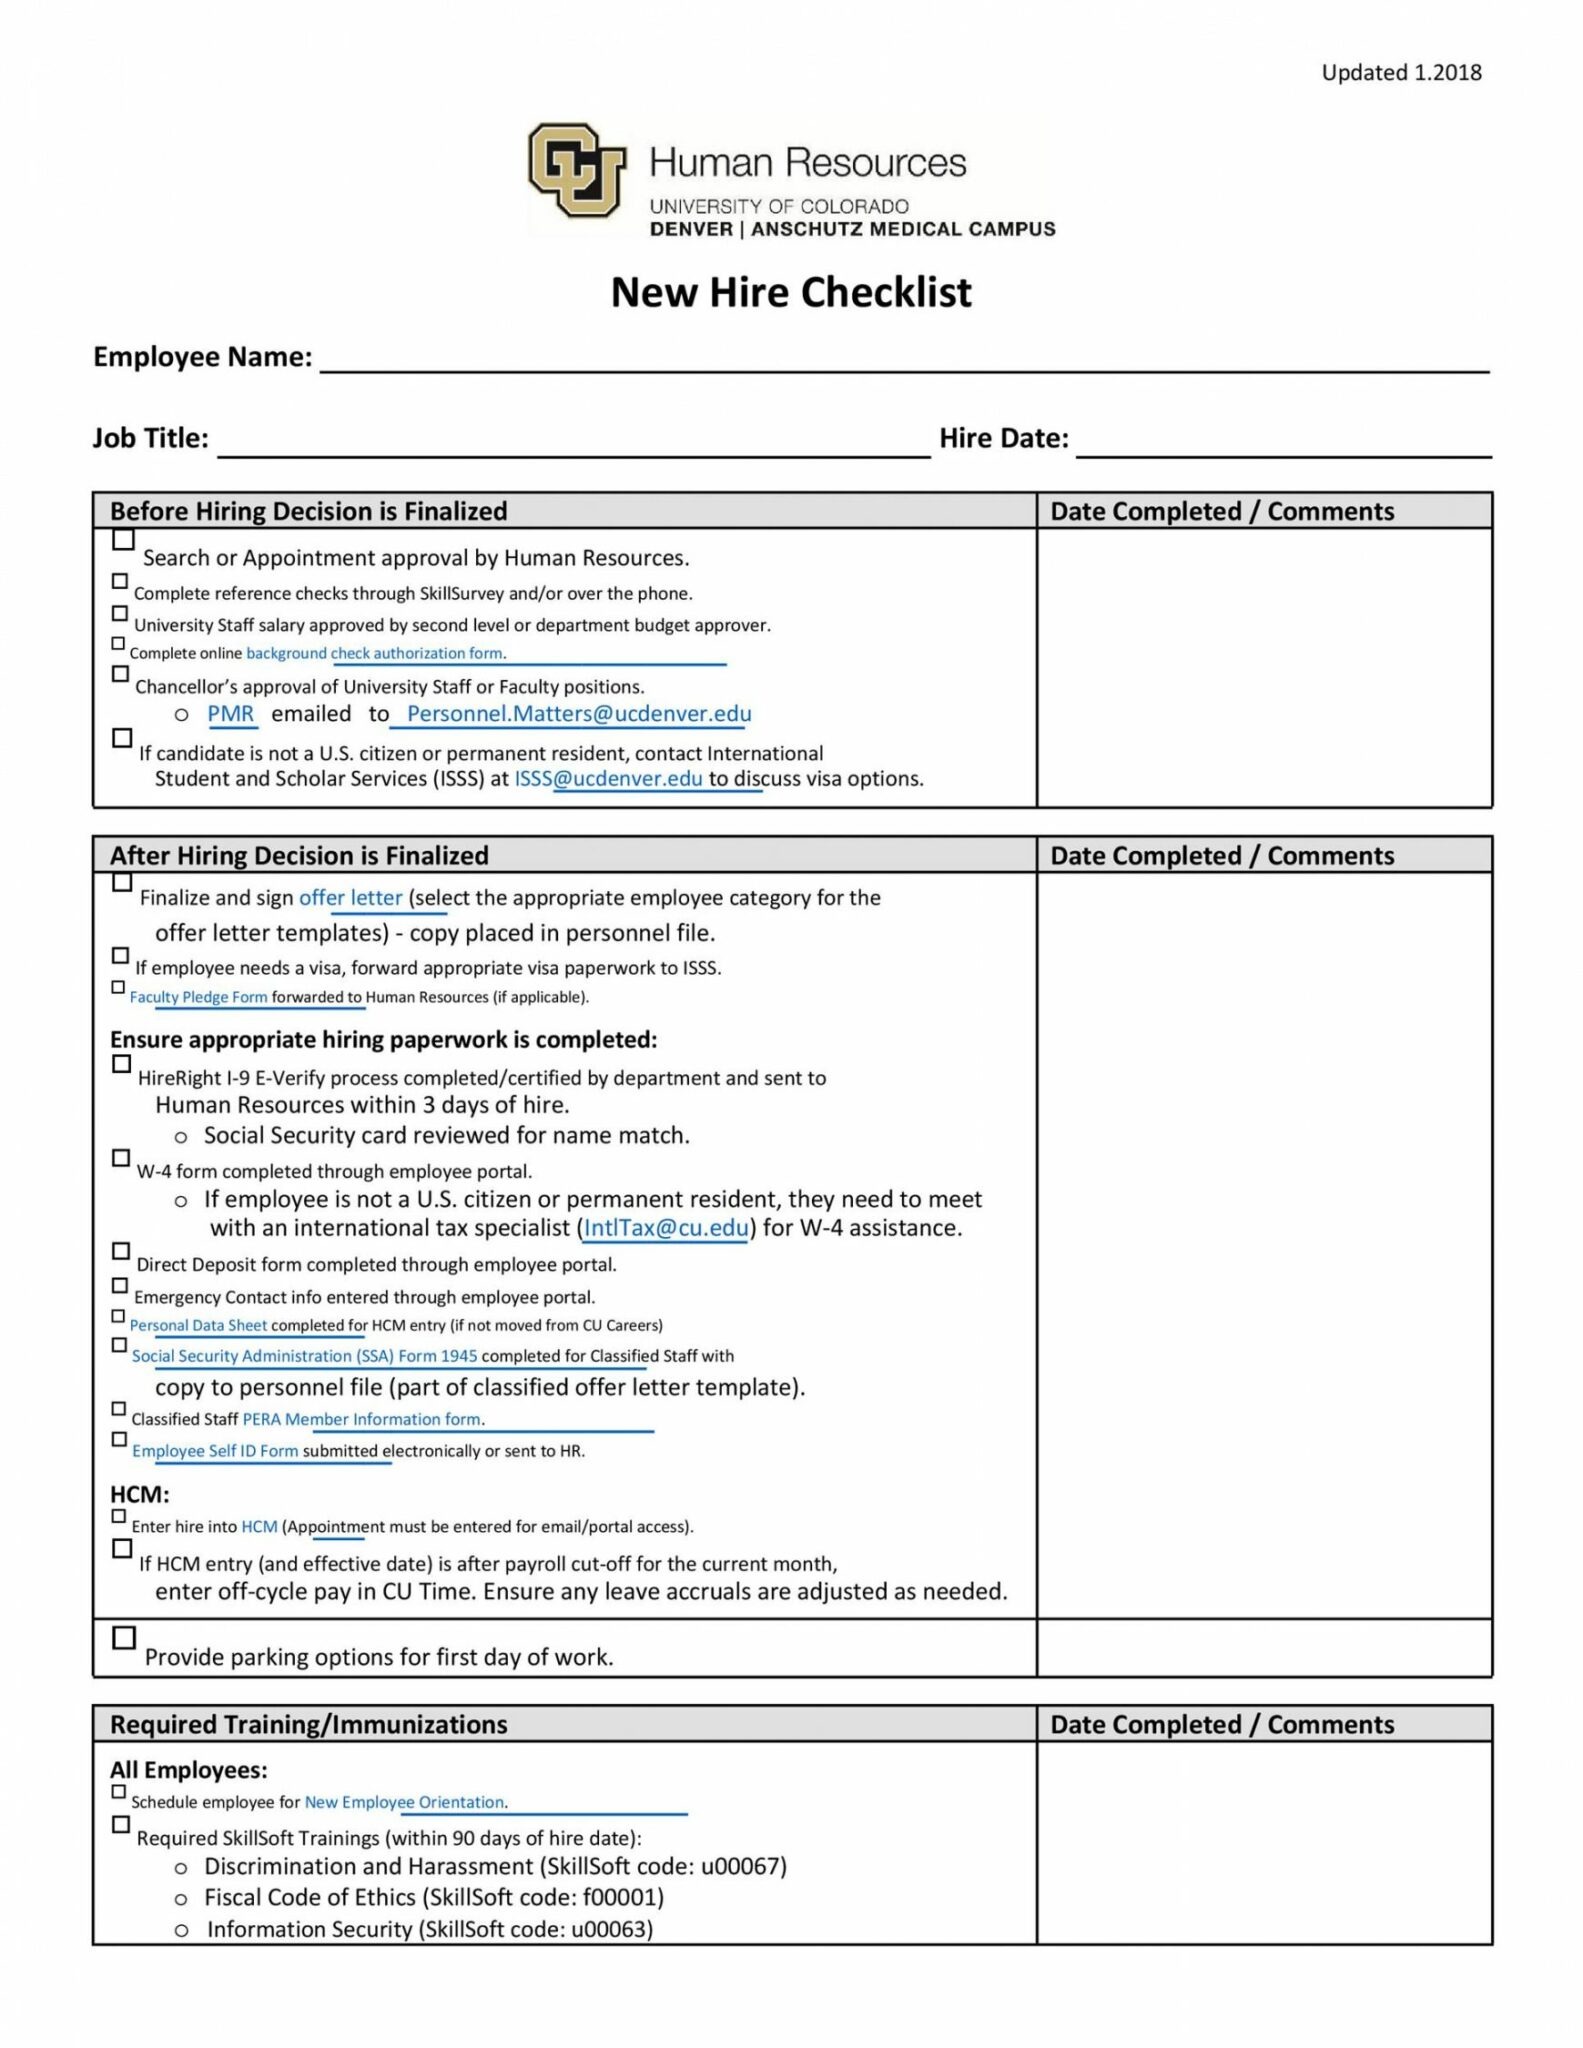 printable-50-useful-new-hire-checklist-templates-forms-templatelab